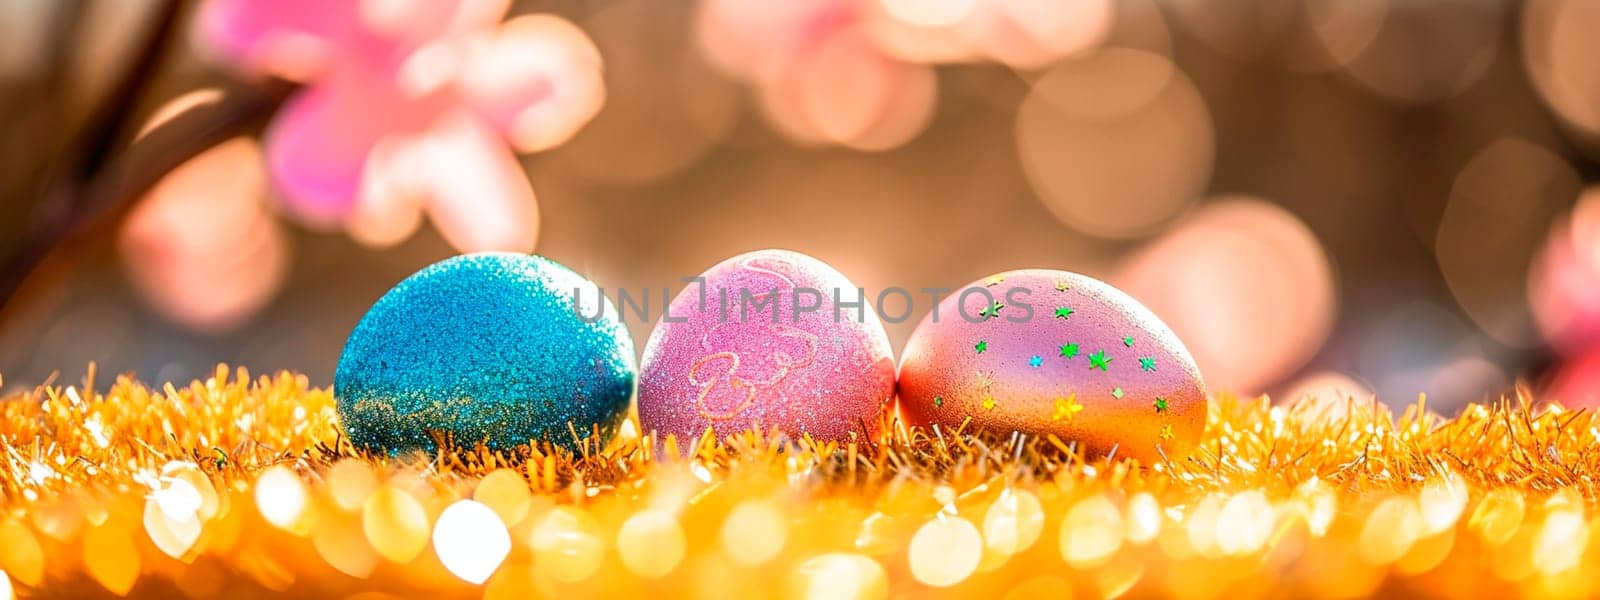 Shiny egg for Easter. Selective focus. Food,